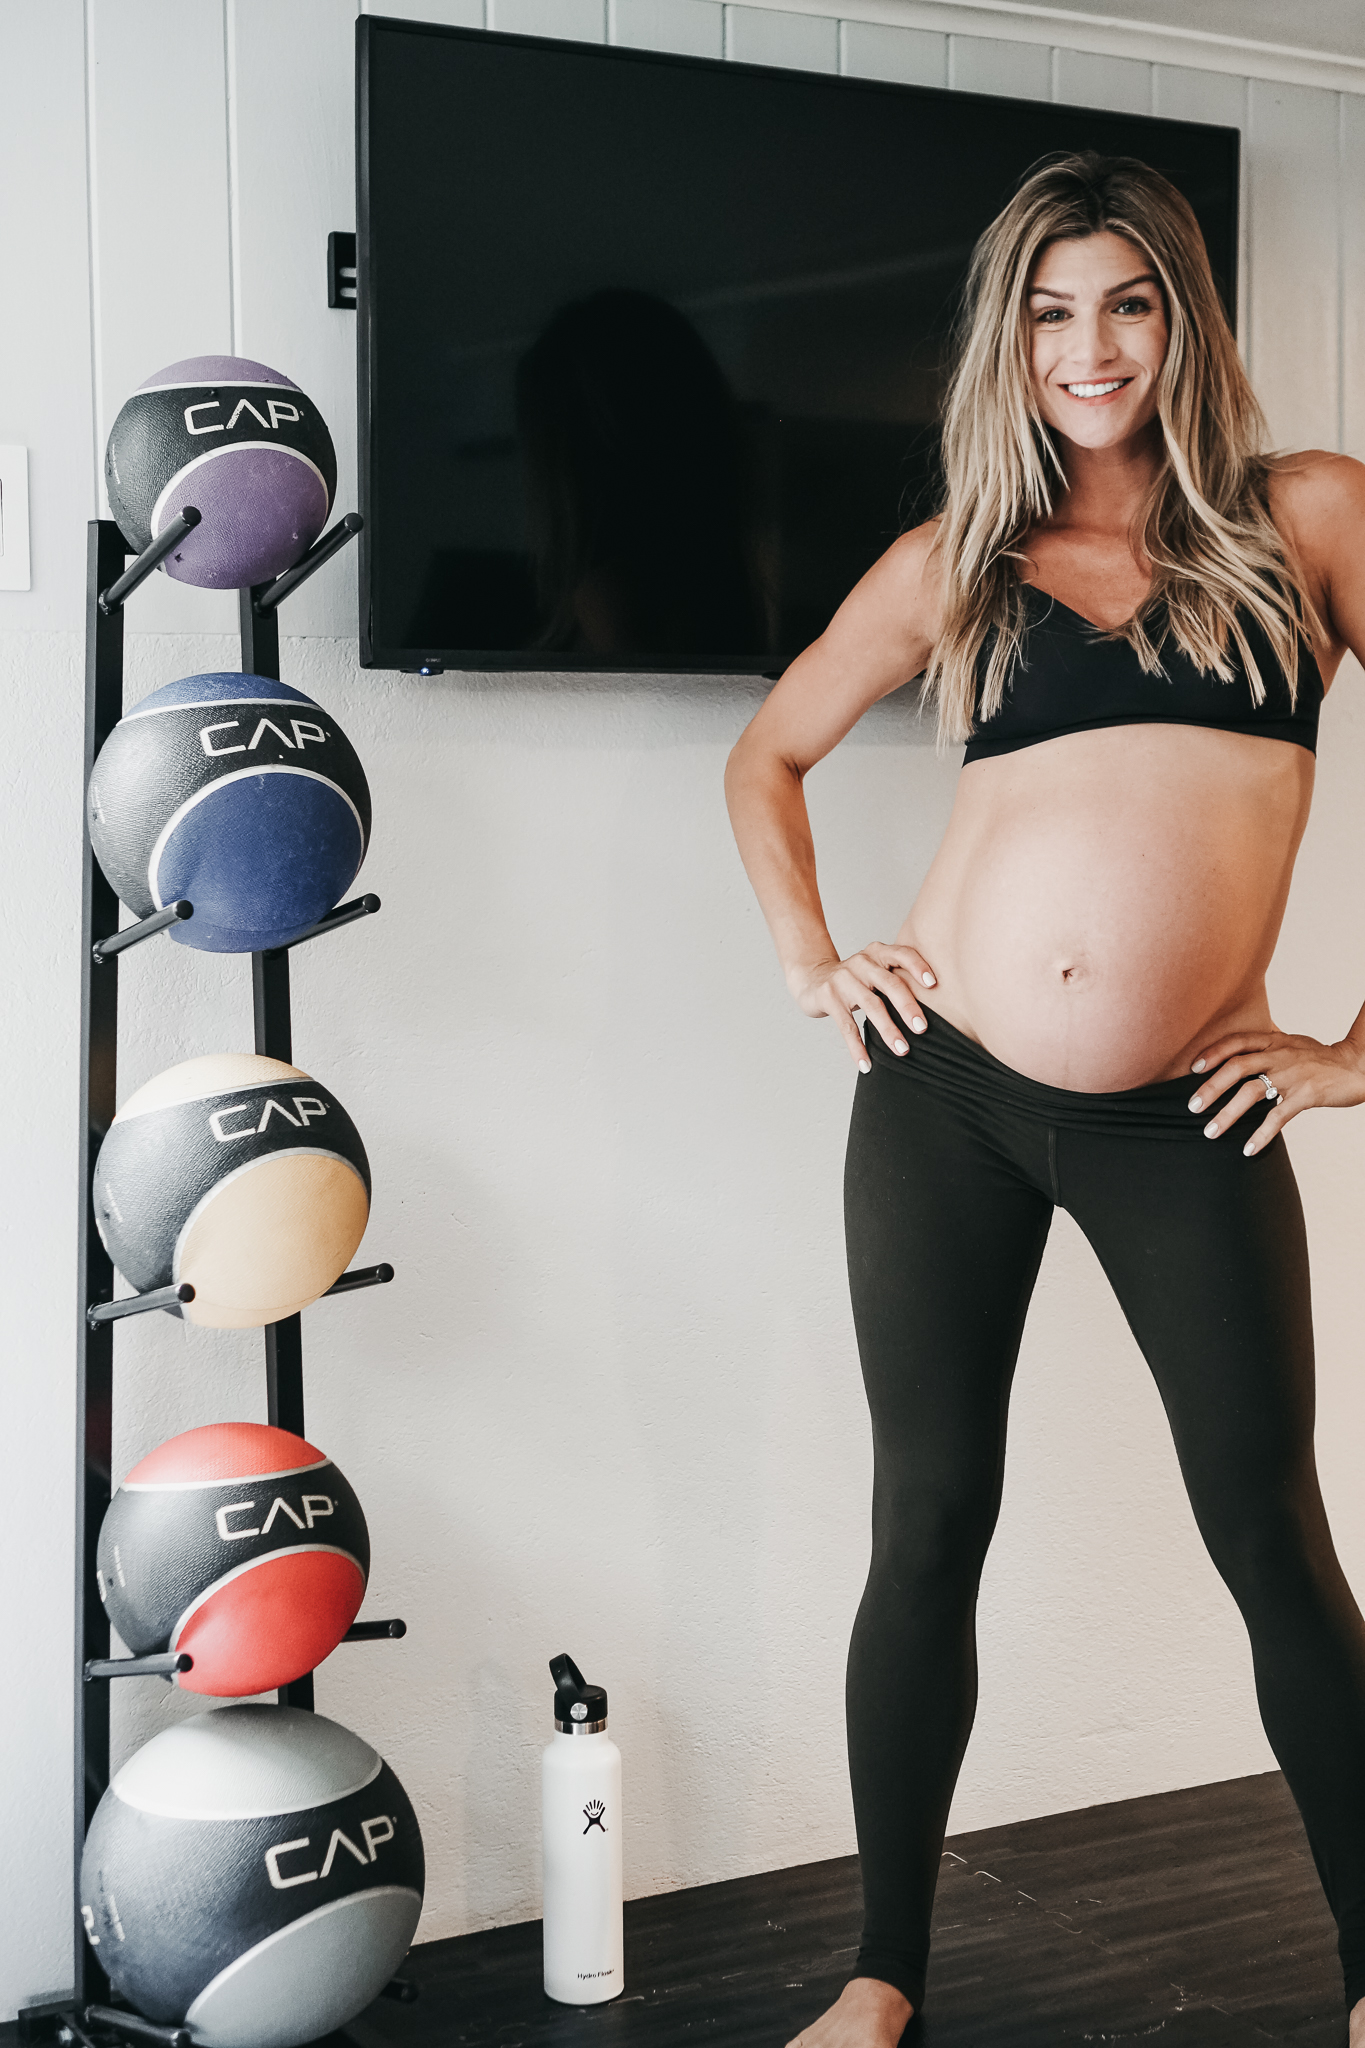 The Grey Edit - Cortney Bigelow - 40 Weeks Pregnant - Baby B - Staying Fit During Pregnancy - Home Gym